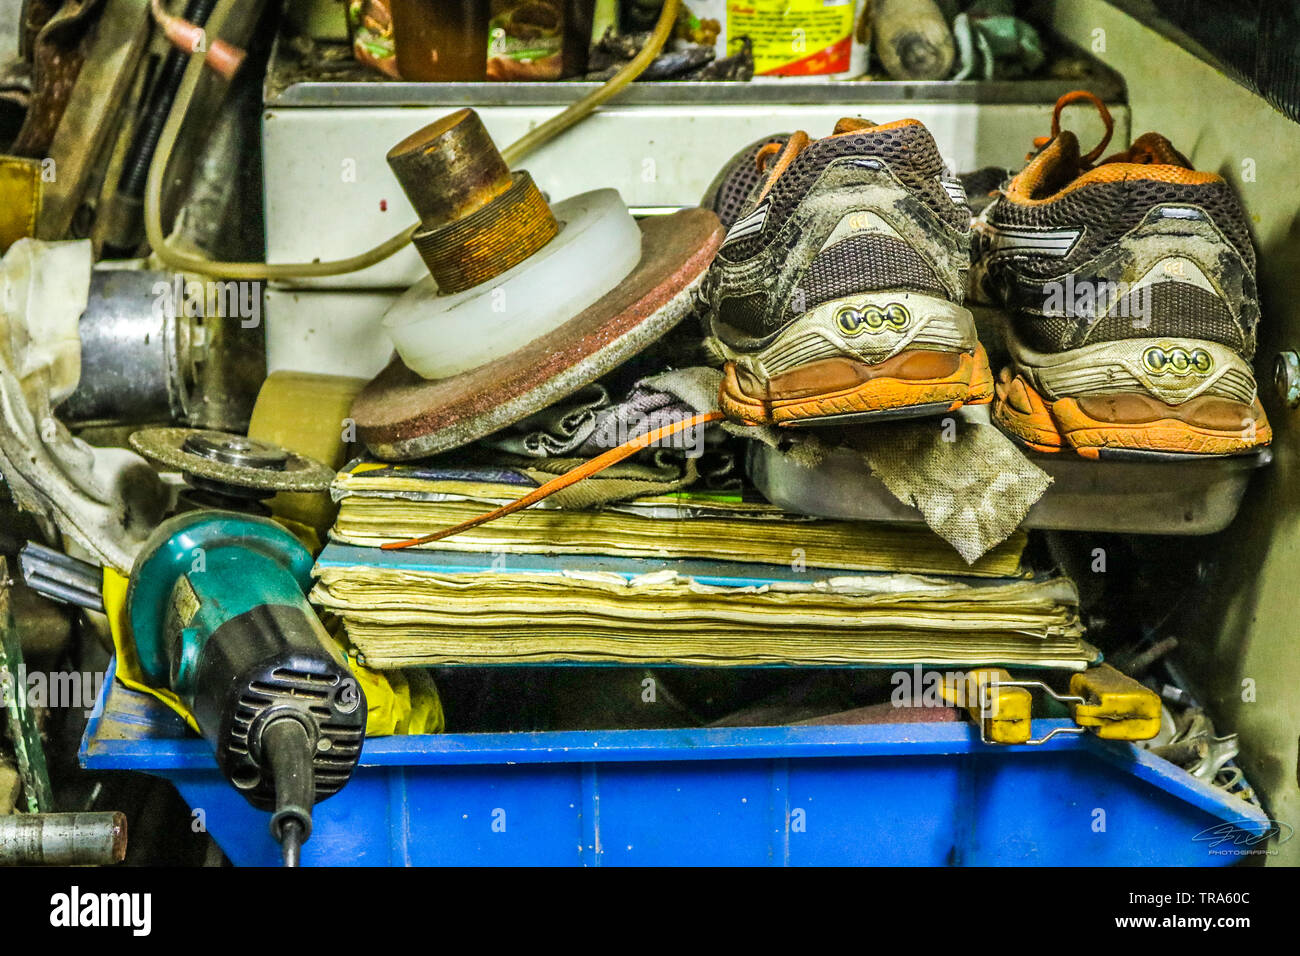 Different dumped and old stuff like shoes papers and wheel. Stock Photo